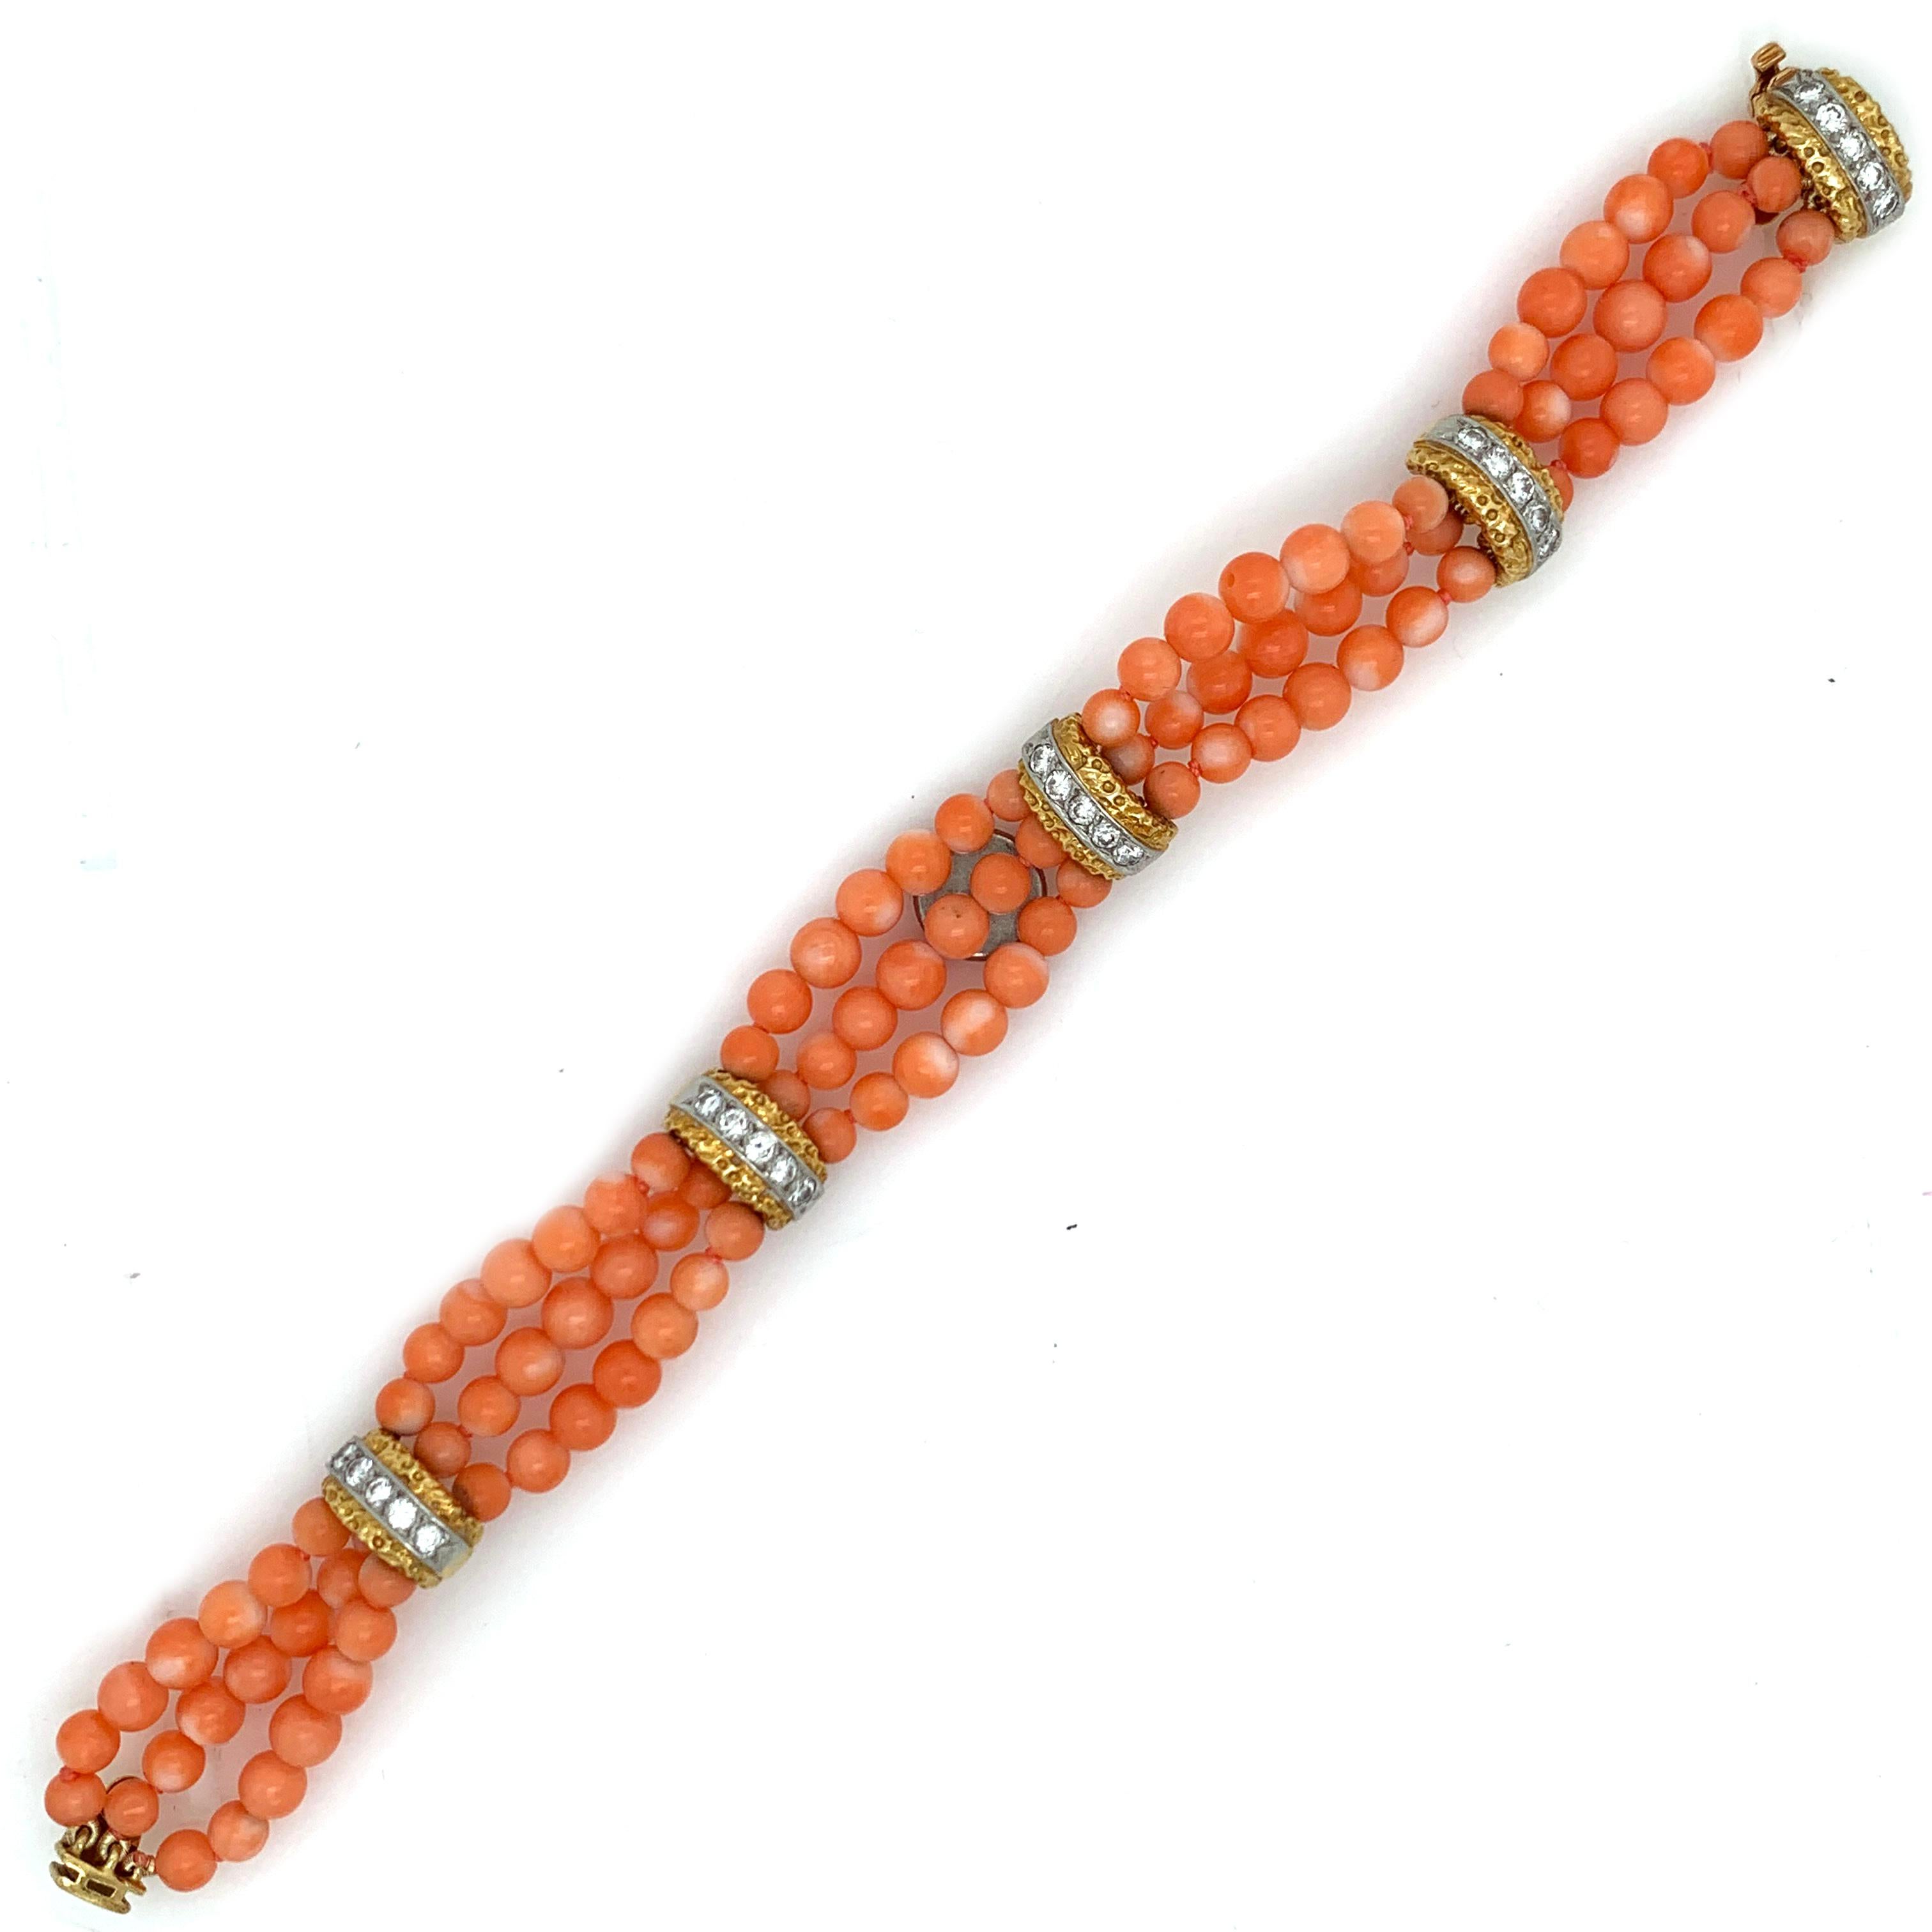 A, beautiful 7in Van Cleefs and Arpels 18kt Yellow Gold Diamond and Coral bead bracelet. With a weight of 28.8grams and 0.5in wide. This beautiful V.C.A stamped 21865 features a beautiful collection of well matched coral beads and sparkling